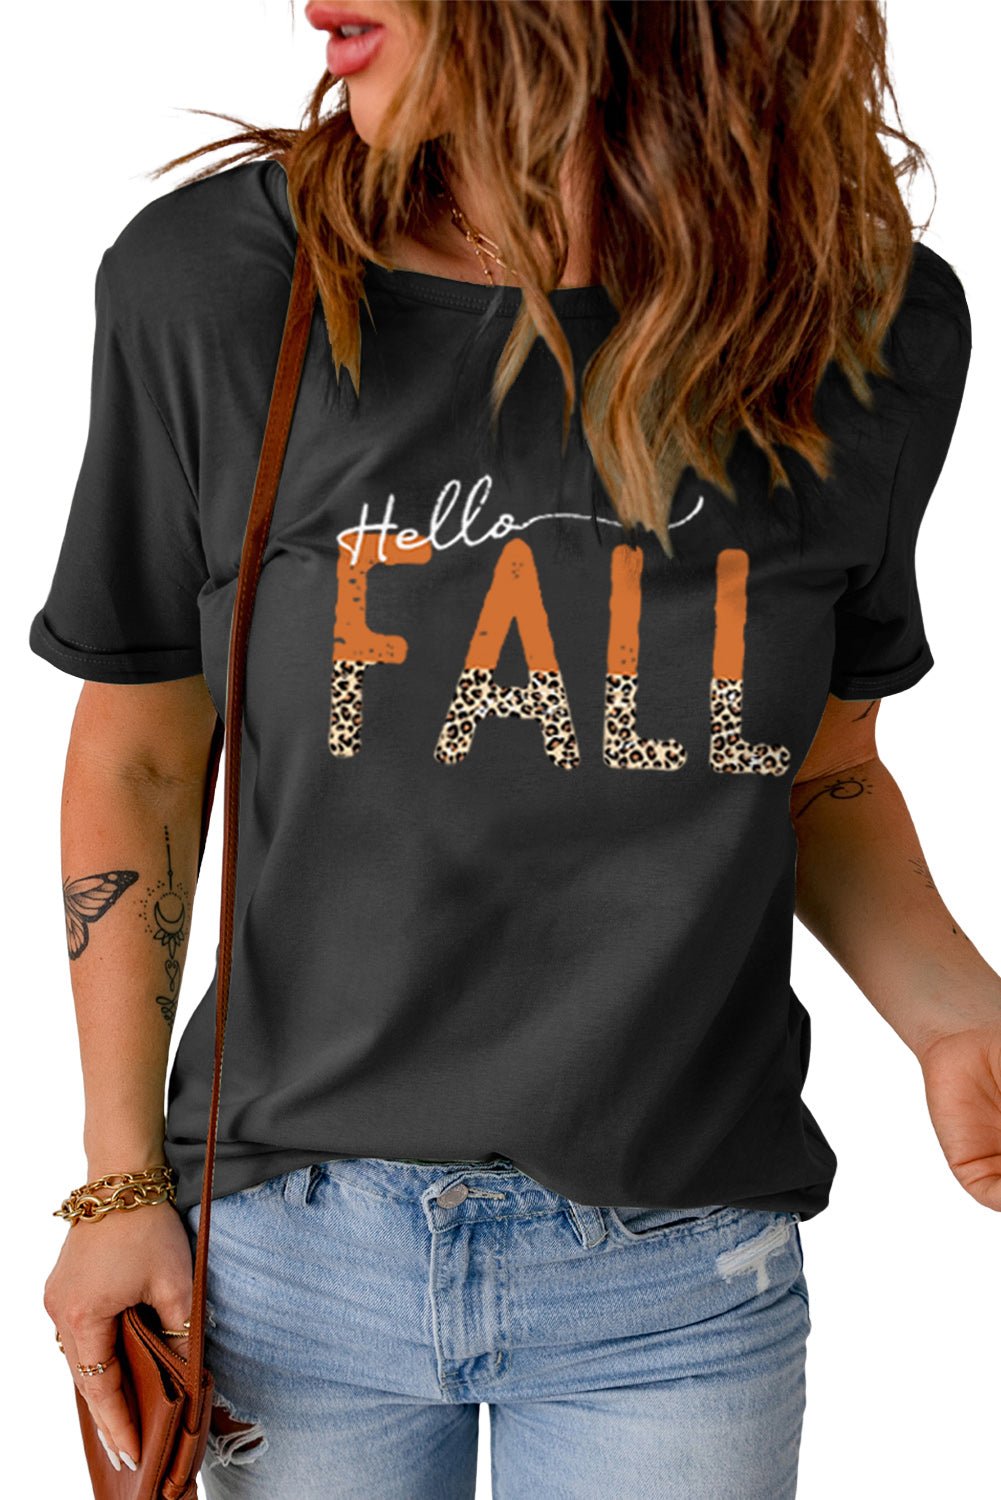 HELLO FALL Graphic Tee - Fashion Girl Online Store